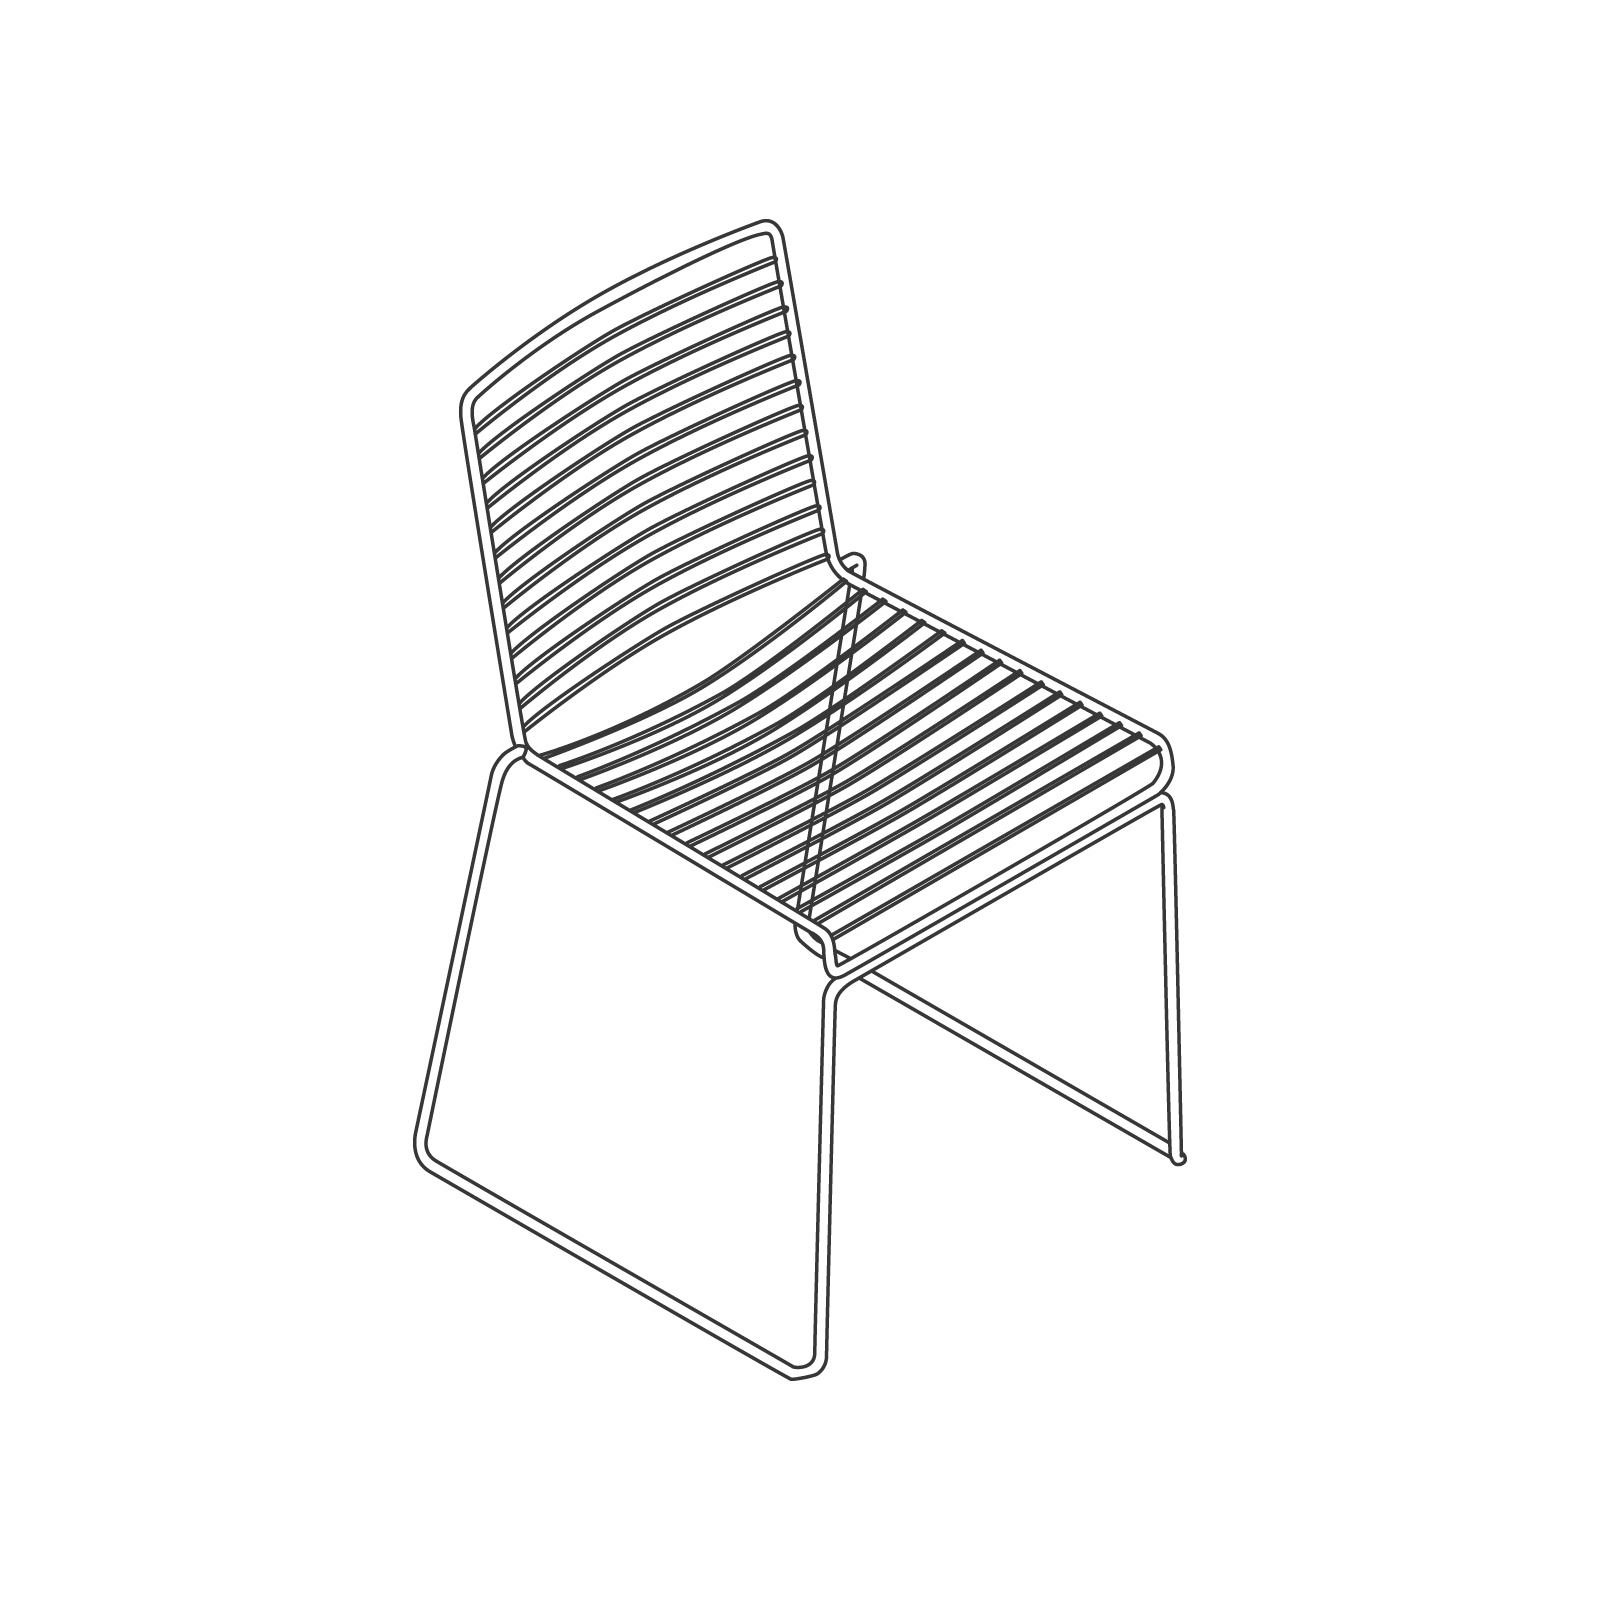 A line drawing - Hee Chair